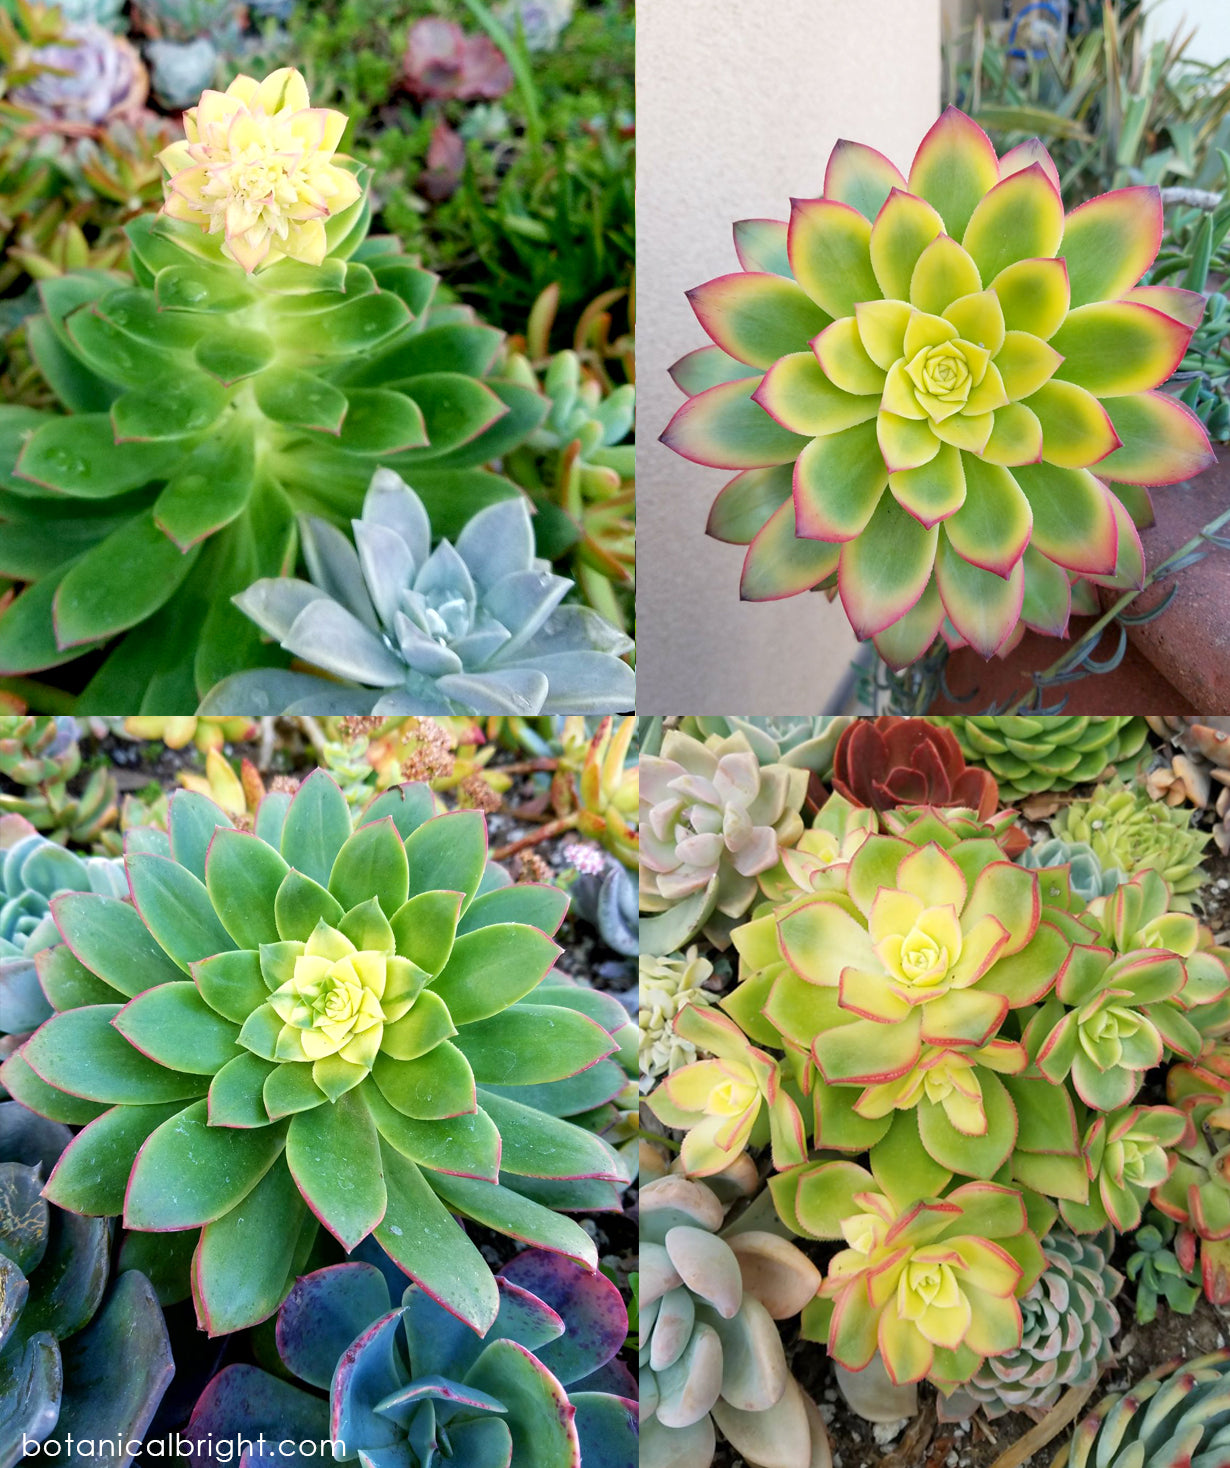 Aeonium Kiwi – Botanical Bright - Add a Little Beauty to Your Everyday